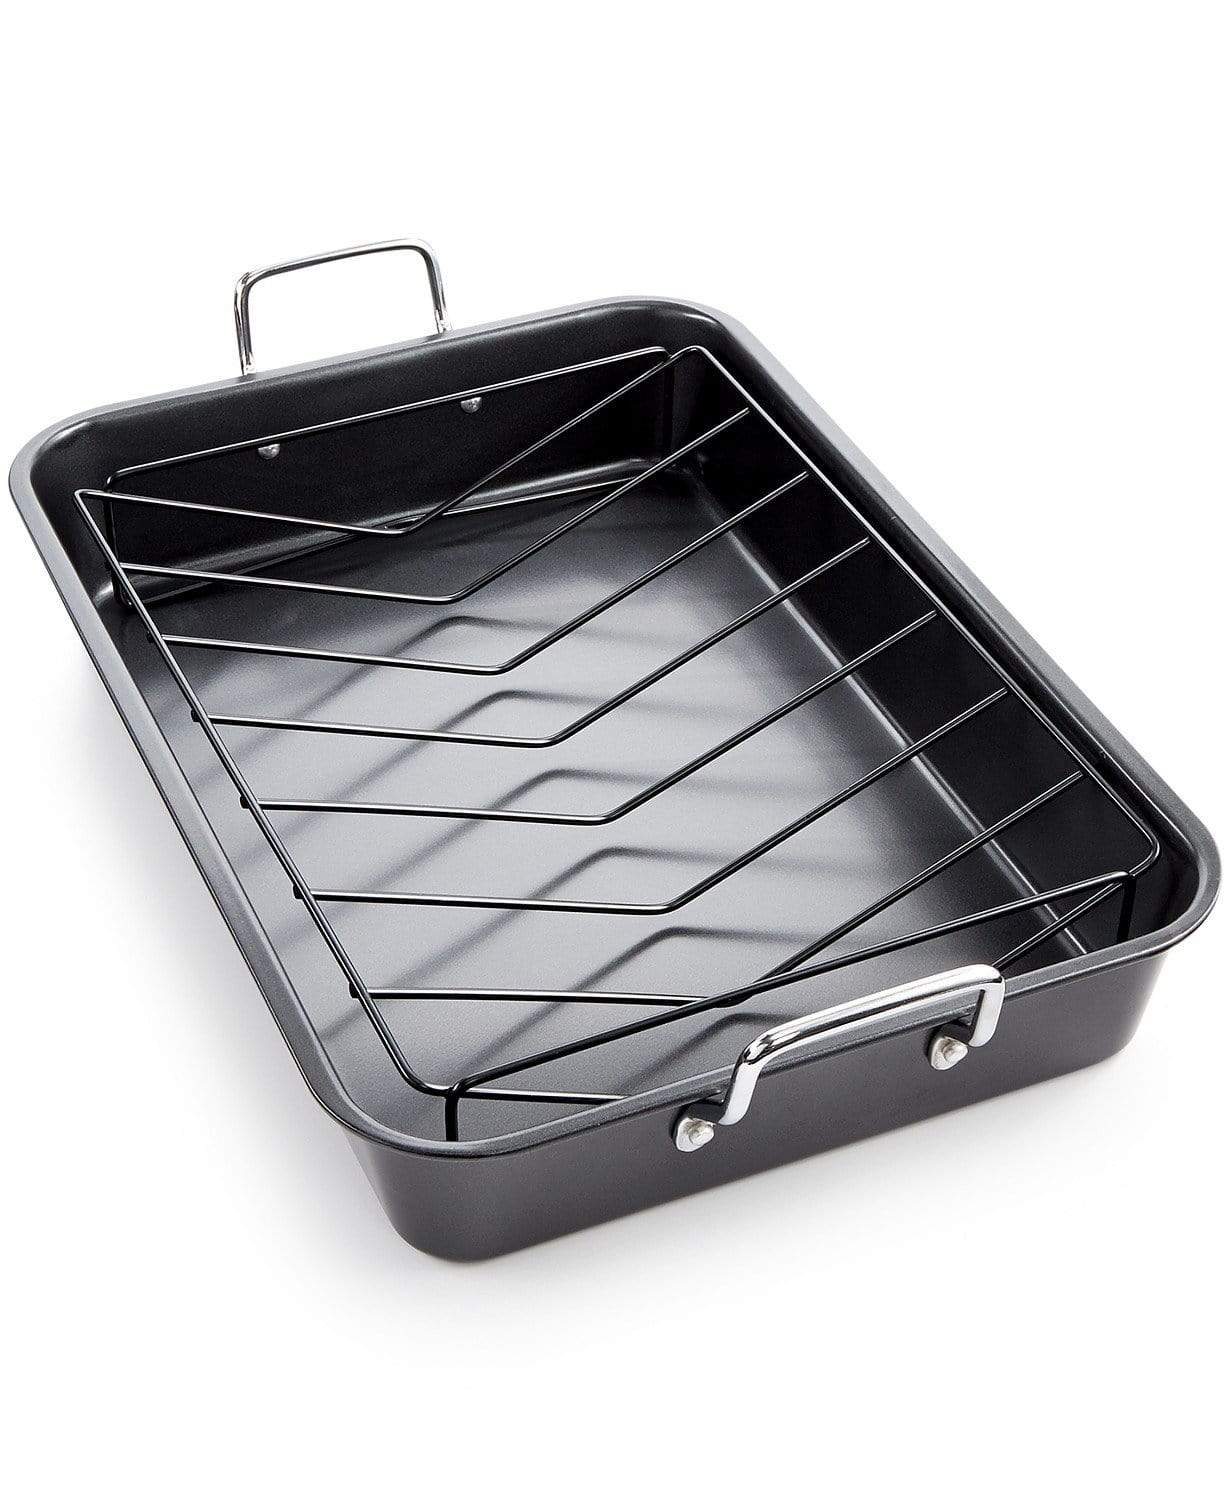 Tools of the Trade Kitchenware Nonstick Roaster & Rack